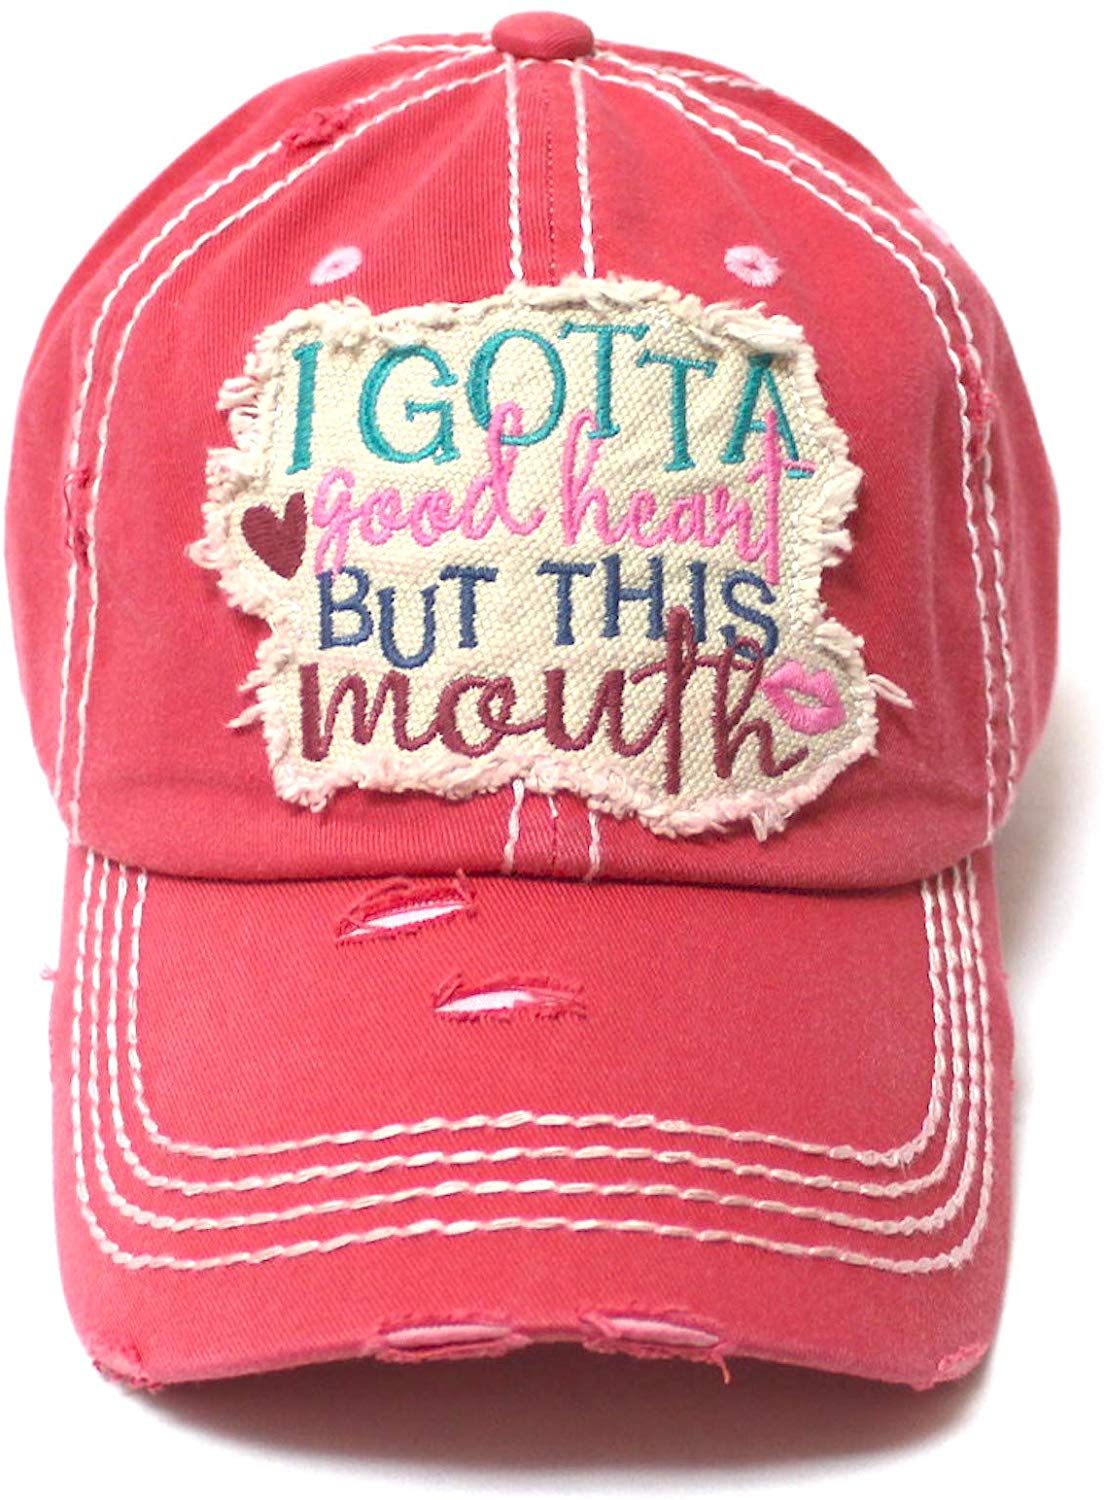 Women's Distressed Ballcap I Gotta Good Heart but This Mouth Hearts, Kisses Patch Embroidery Hat, Coral Rose - Caps 'N Vintage 